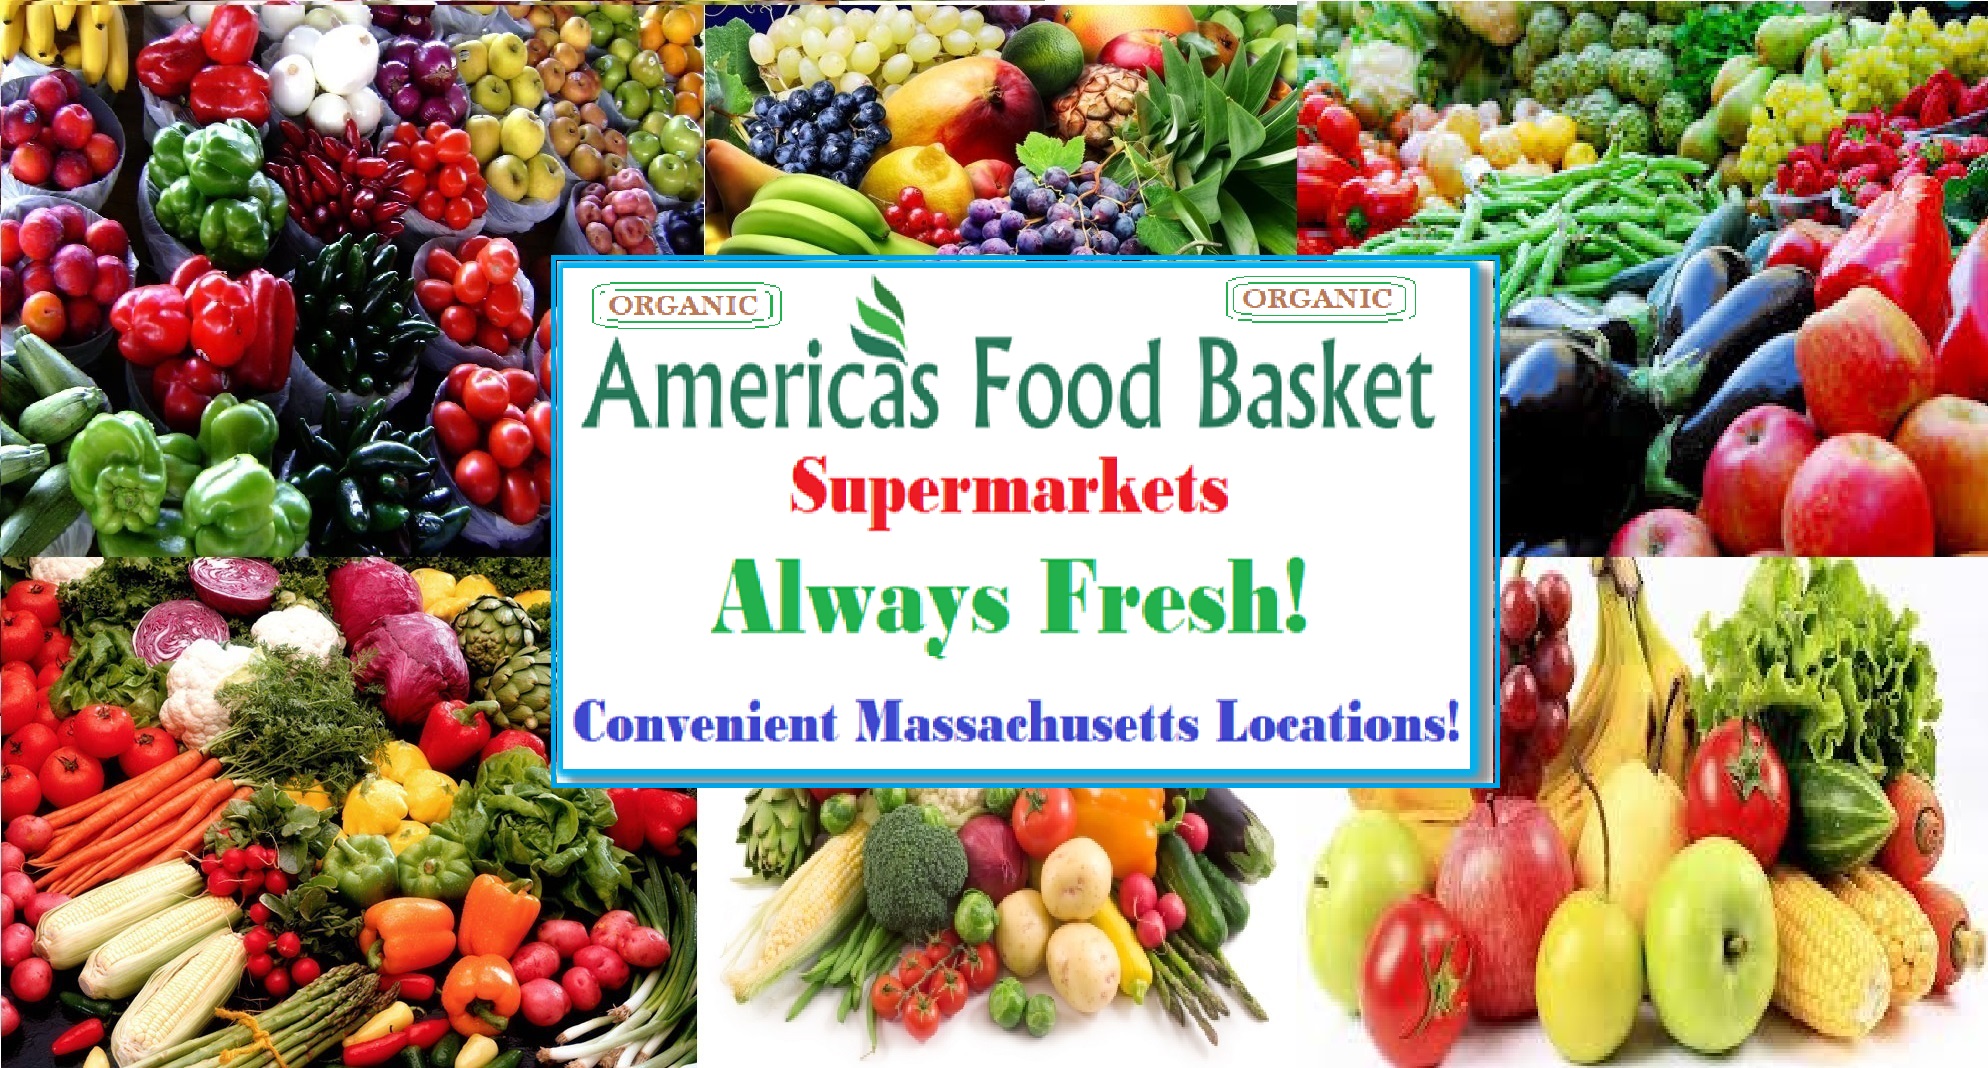 America's Food Basket Supermarkets | Massachusetts Locations | Maintain a Healthy BMI | Avoid Obesity | My Healthy Plate | What's On Your Plate? | Shop Smart! | Plan. Shop. And Save! | Why is it important to eat vegetables? | Nutrient Benefits | Diet-Rich Health benefits | Whole Grains | Organic Food | Vegan Food Recipes | Vegetarian Recipes | Few Things You Should Always Buy at America's Food Basket | Shoppers love America's Food Basket Supermarkets | Rotisserie Chicken For The Win | Organic Options | Your Family’s Health First | Cold Meats | Baked Goods | Produce | Freshness and Reliability | International Foods | Massachusetts locations International Foods | Cheers to Great Taste, Health, and savings! | [ https://afbmalaunchpad.com/ ]